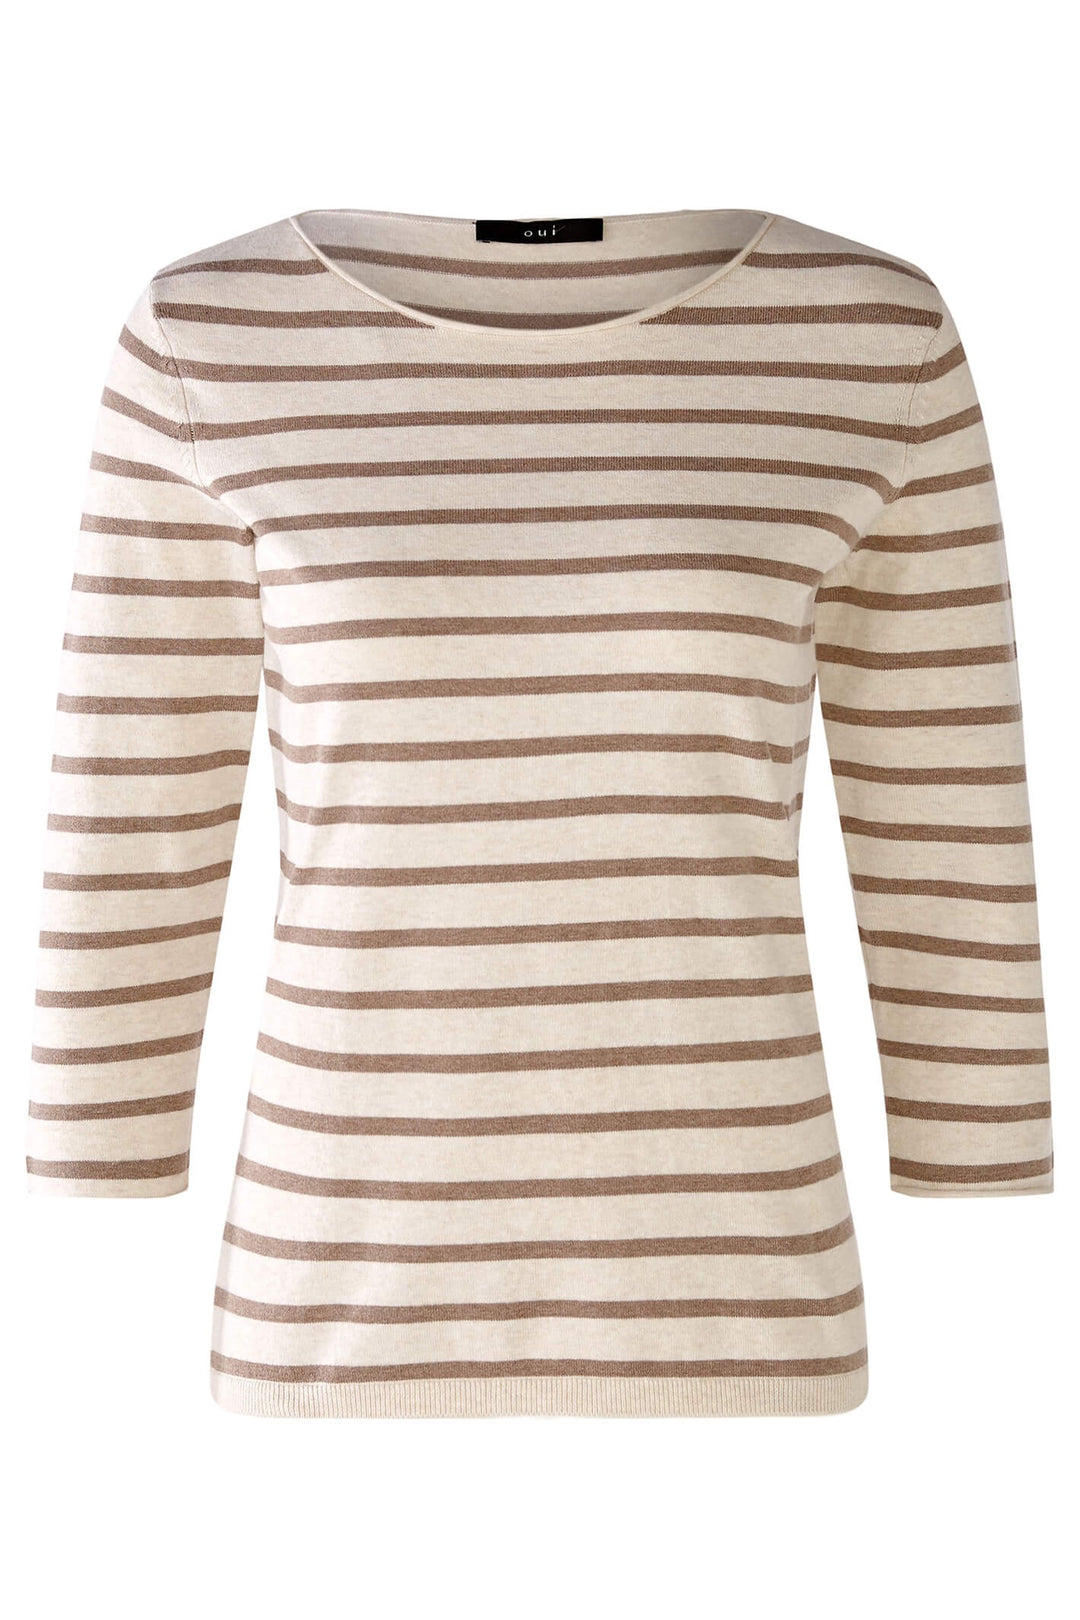 Oui 78939 White Taupe Striped Breton Style Top - Dotique Chesterfield